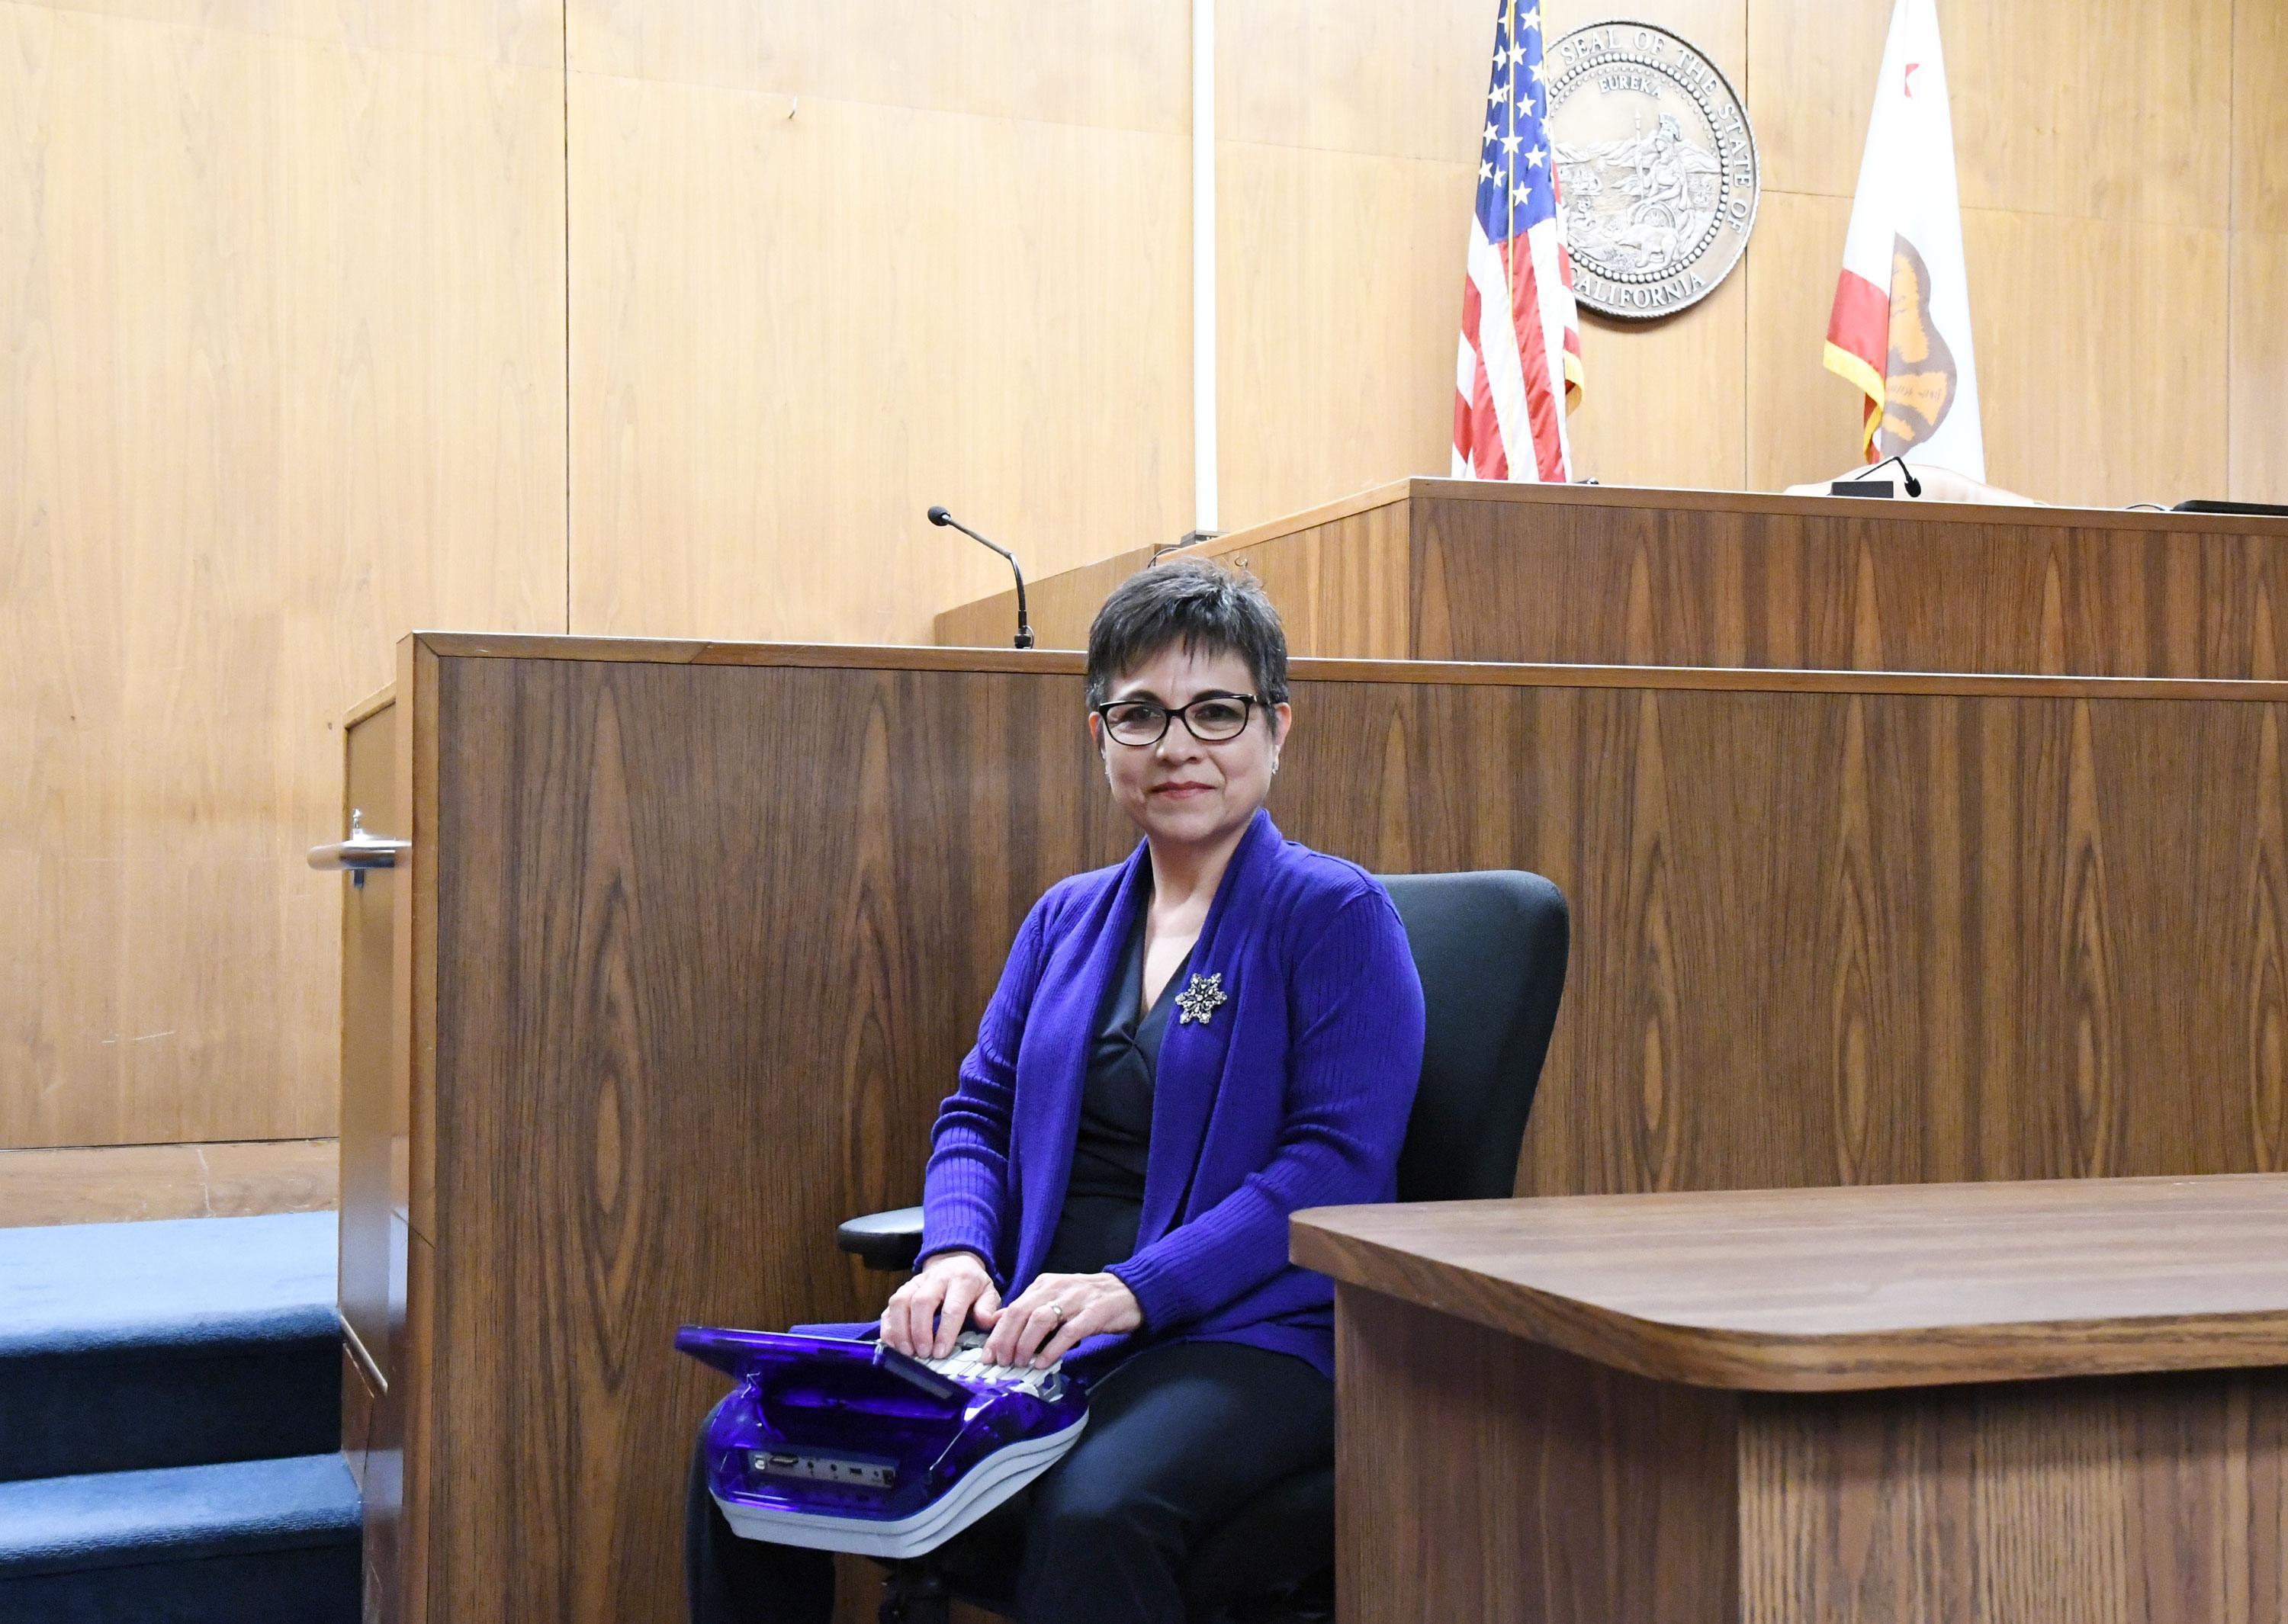 AFSCME Local 10 member Florence Ortiz, an official court reporter for the Stanislaus County Superior Court